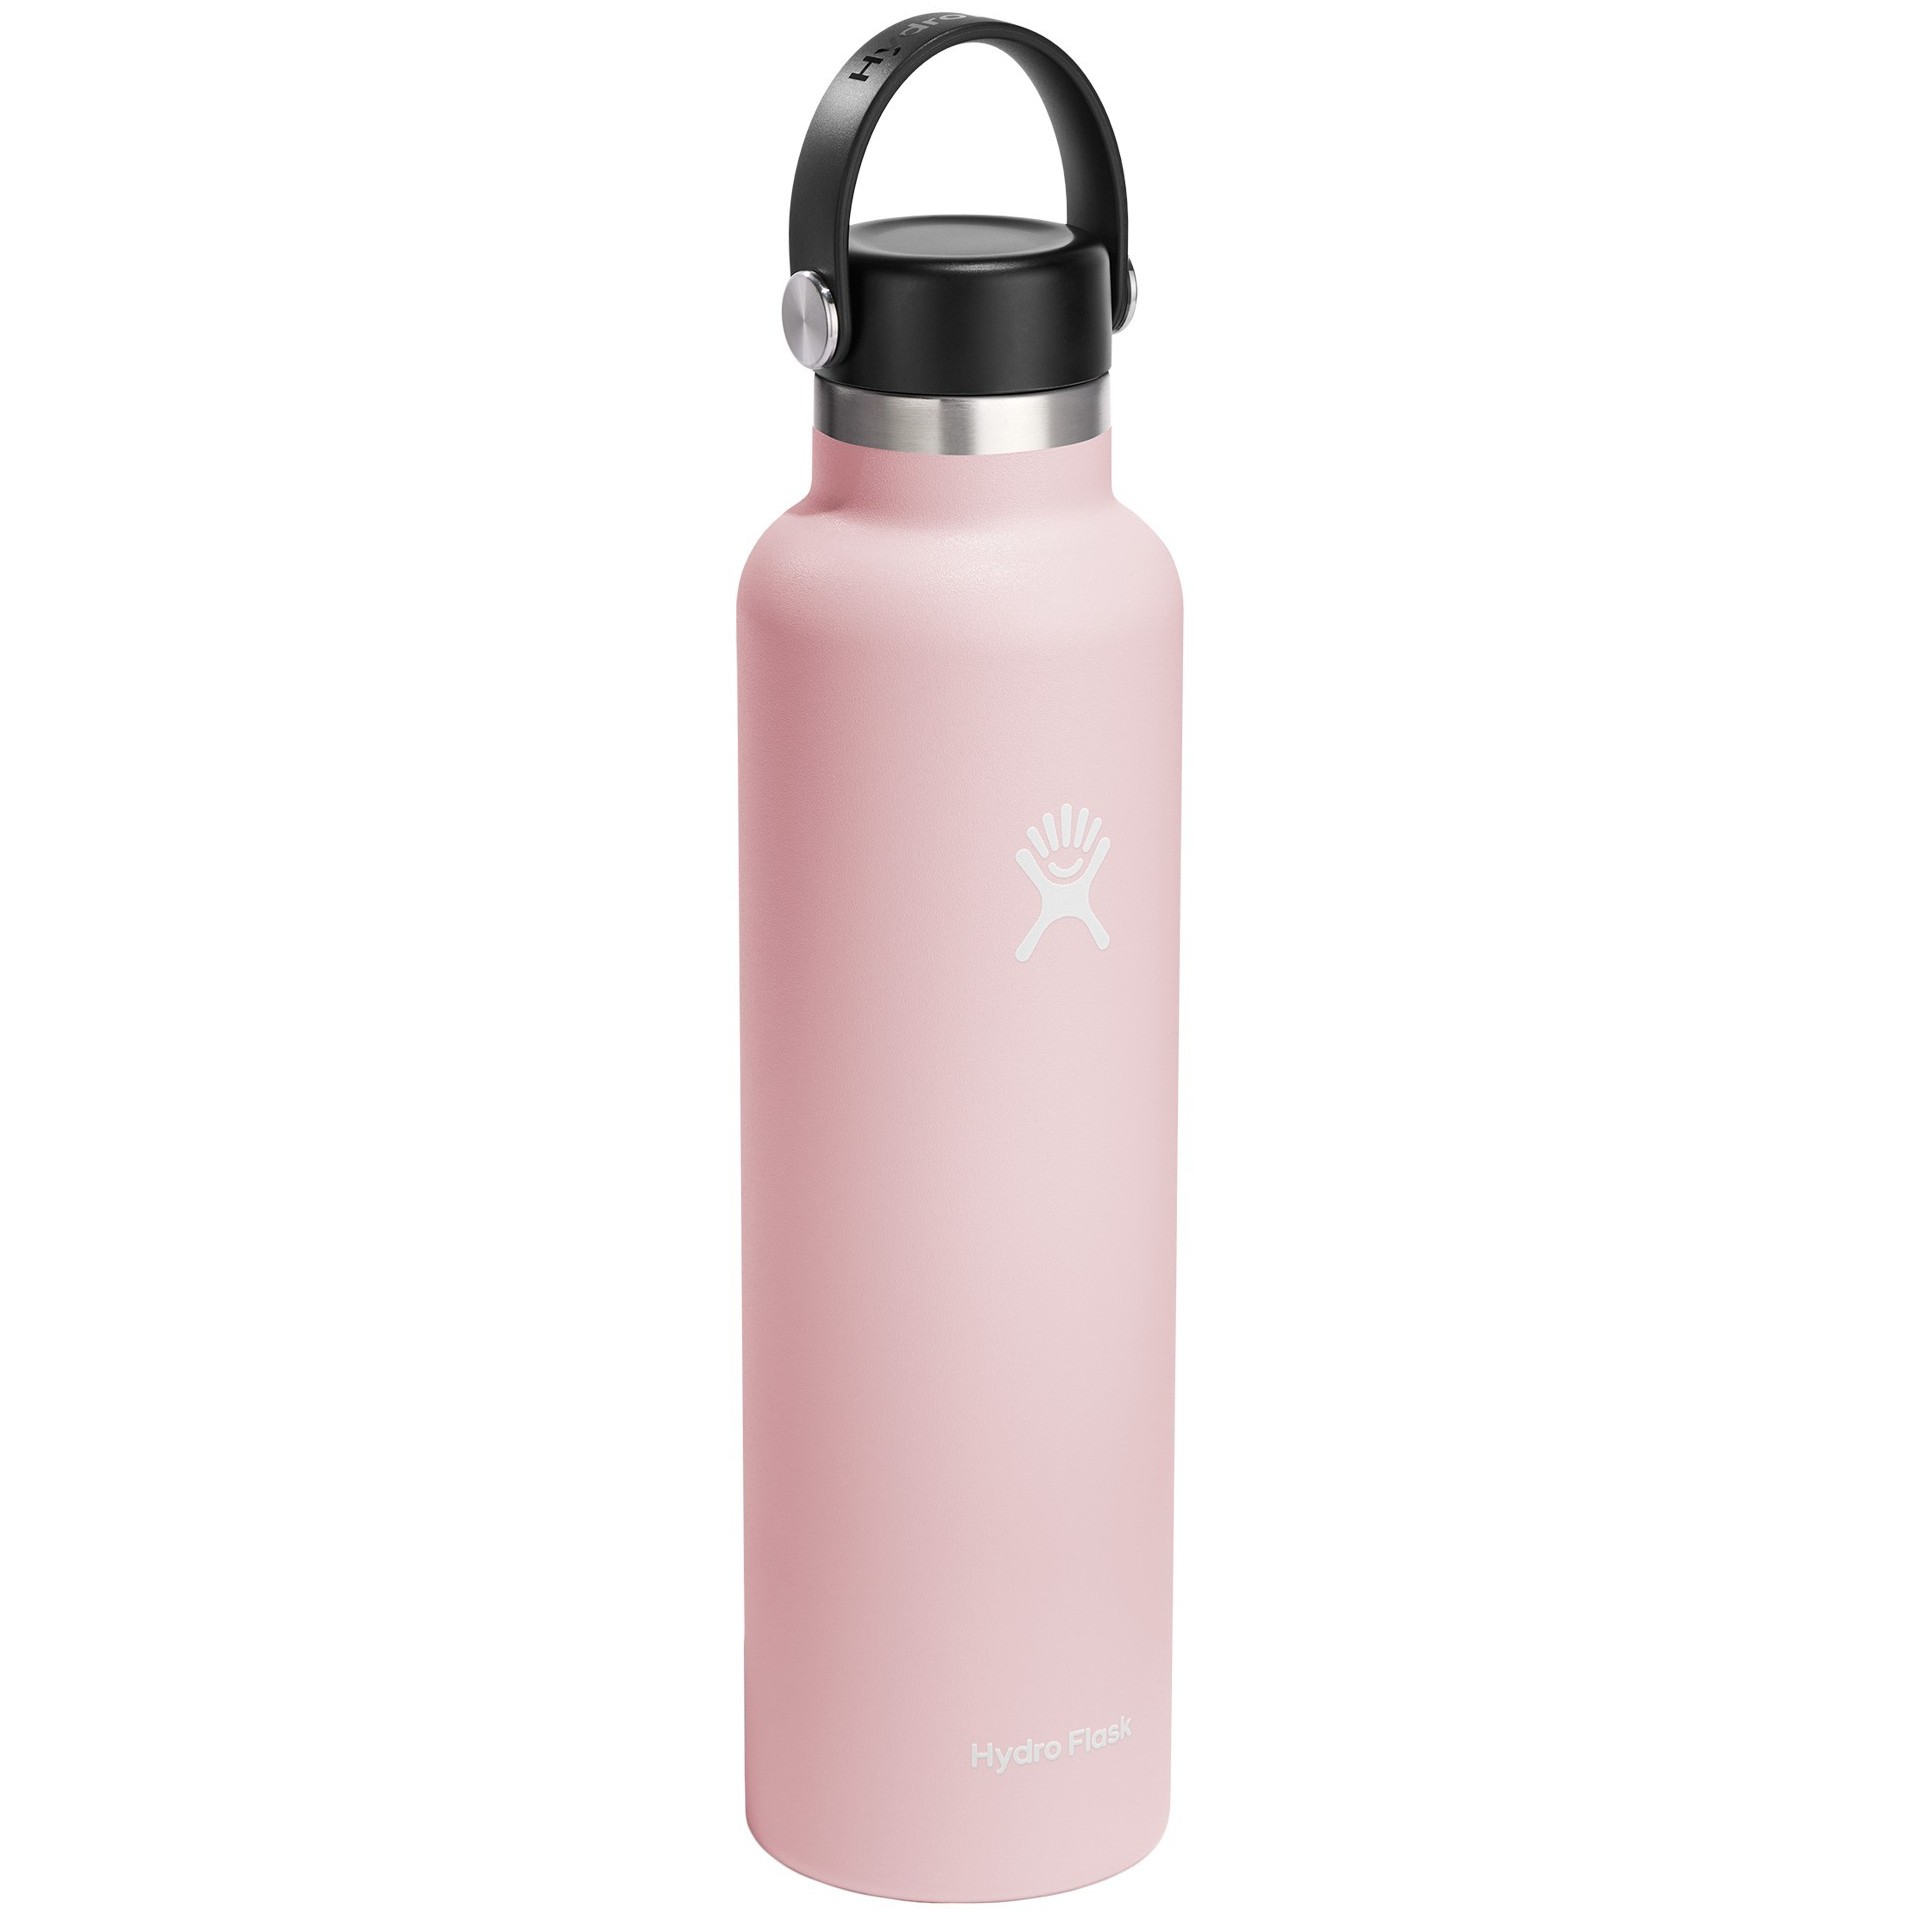 Hydro Flask 21oz Standard Mouth with Flex Cap Water Bottle